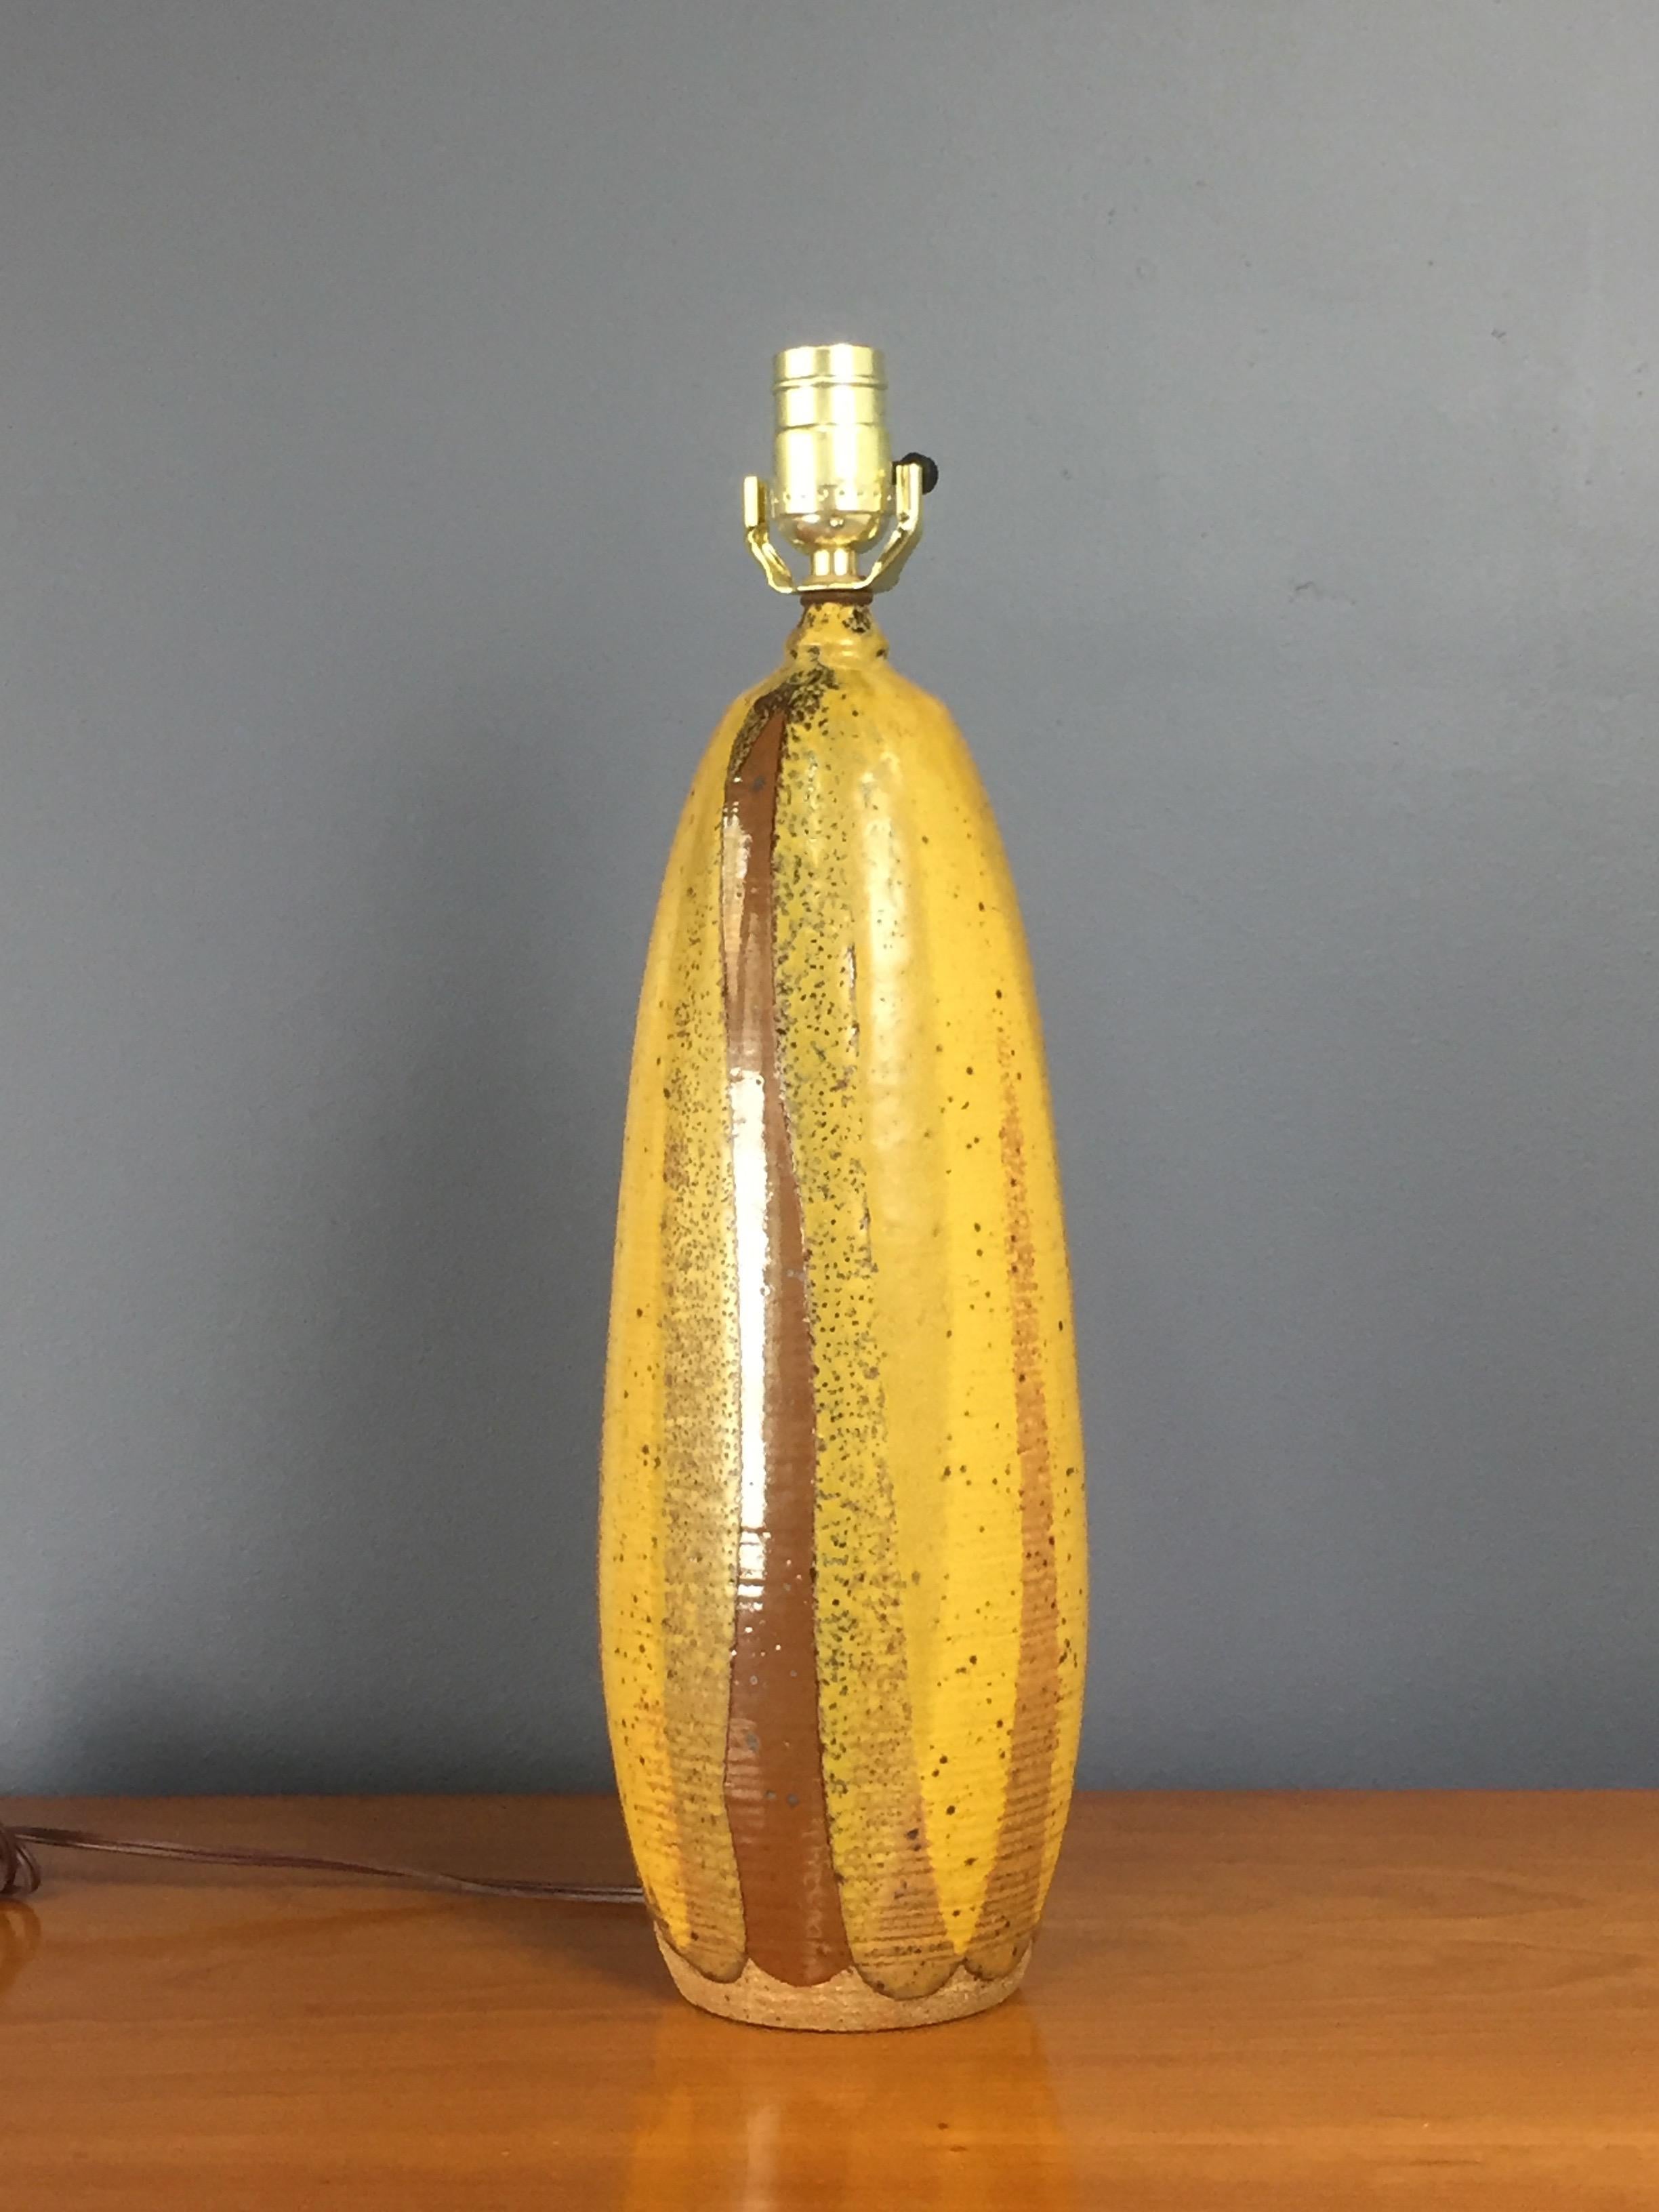 Beautiful ceramic table lamp by artist David Cressey for Architechtural Pottery, this lamp has yellow and brown hues with a textured glaze. The lamp is in excellent condition with no chips or cracks. The lamp measures 16